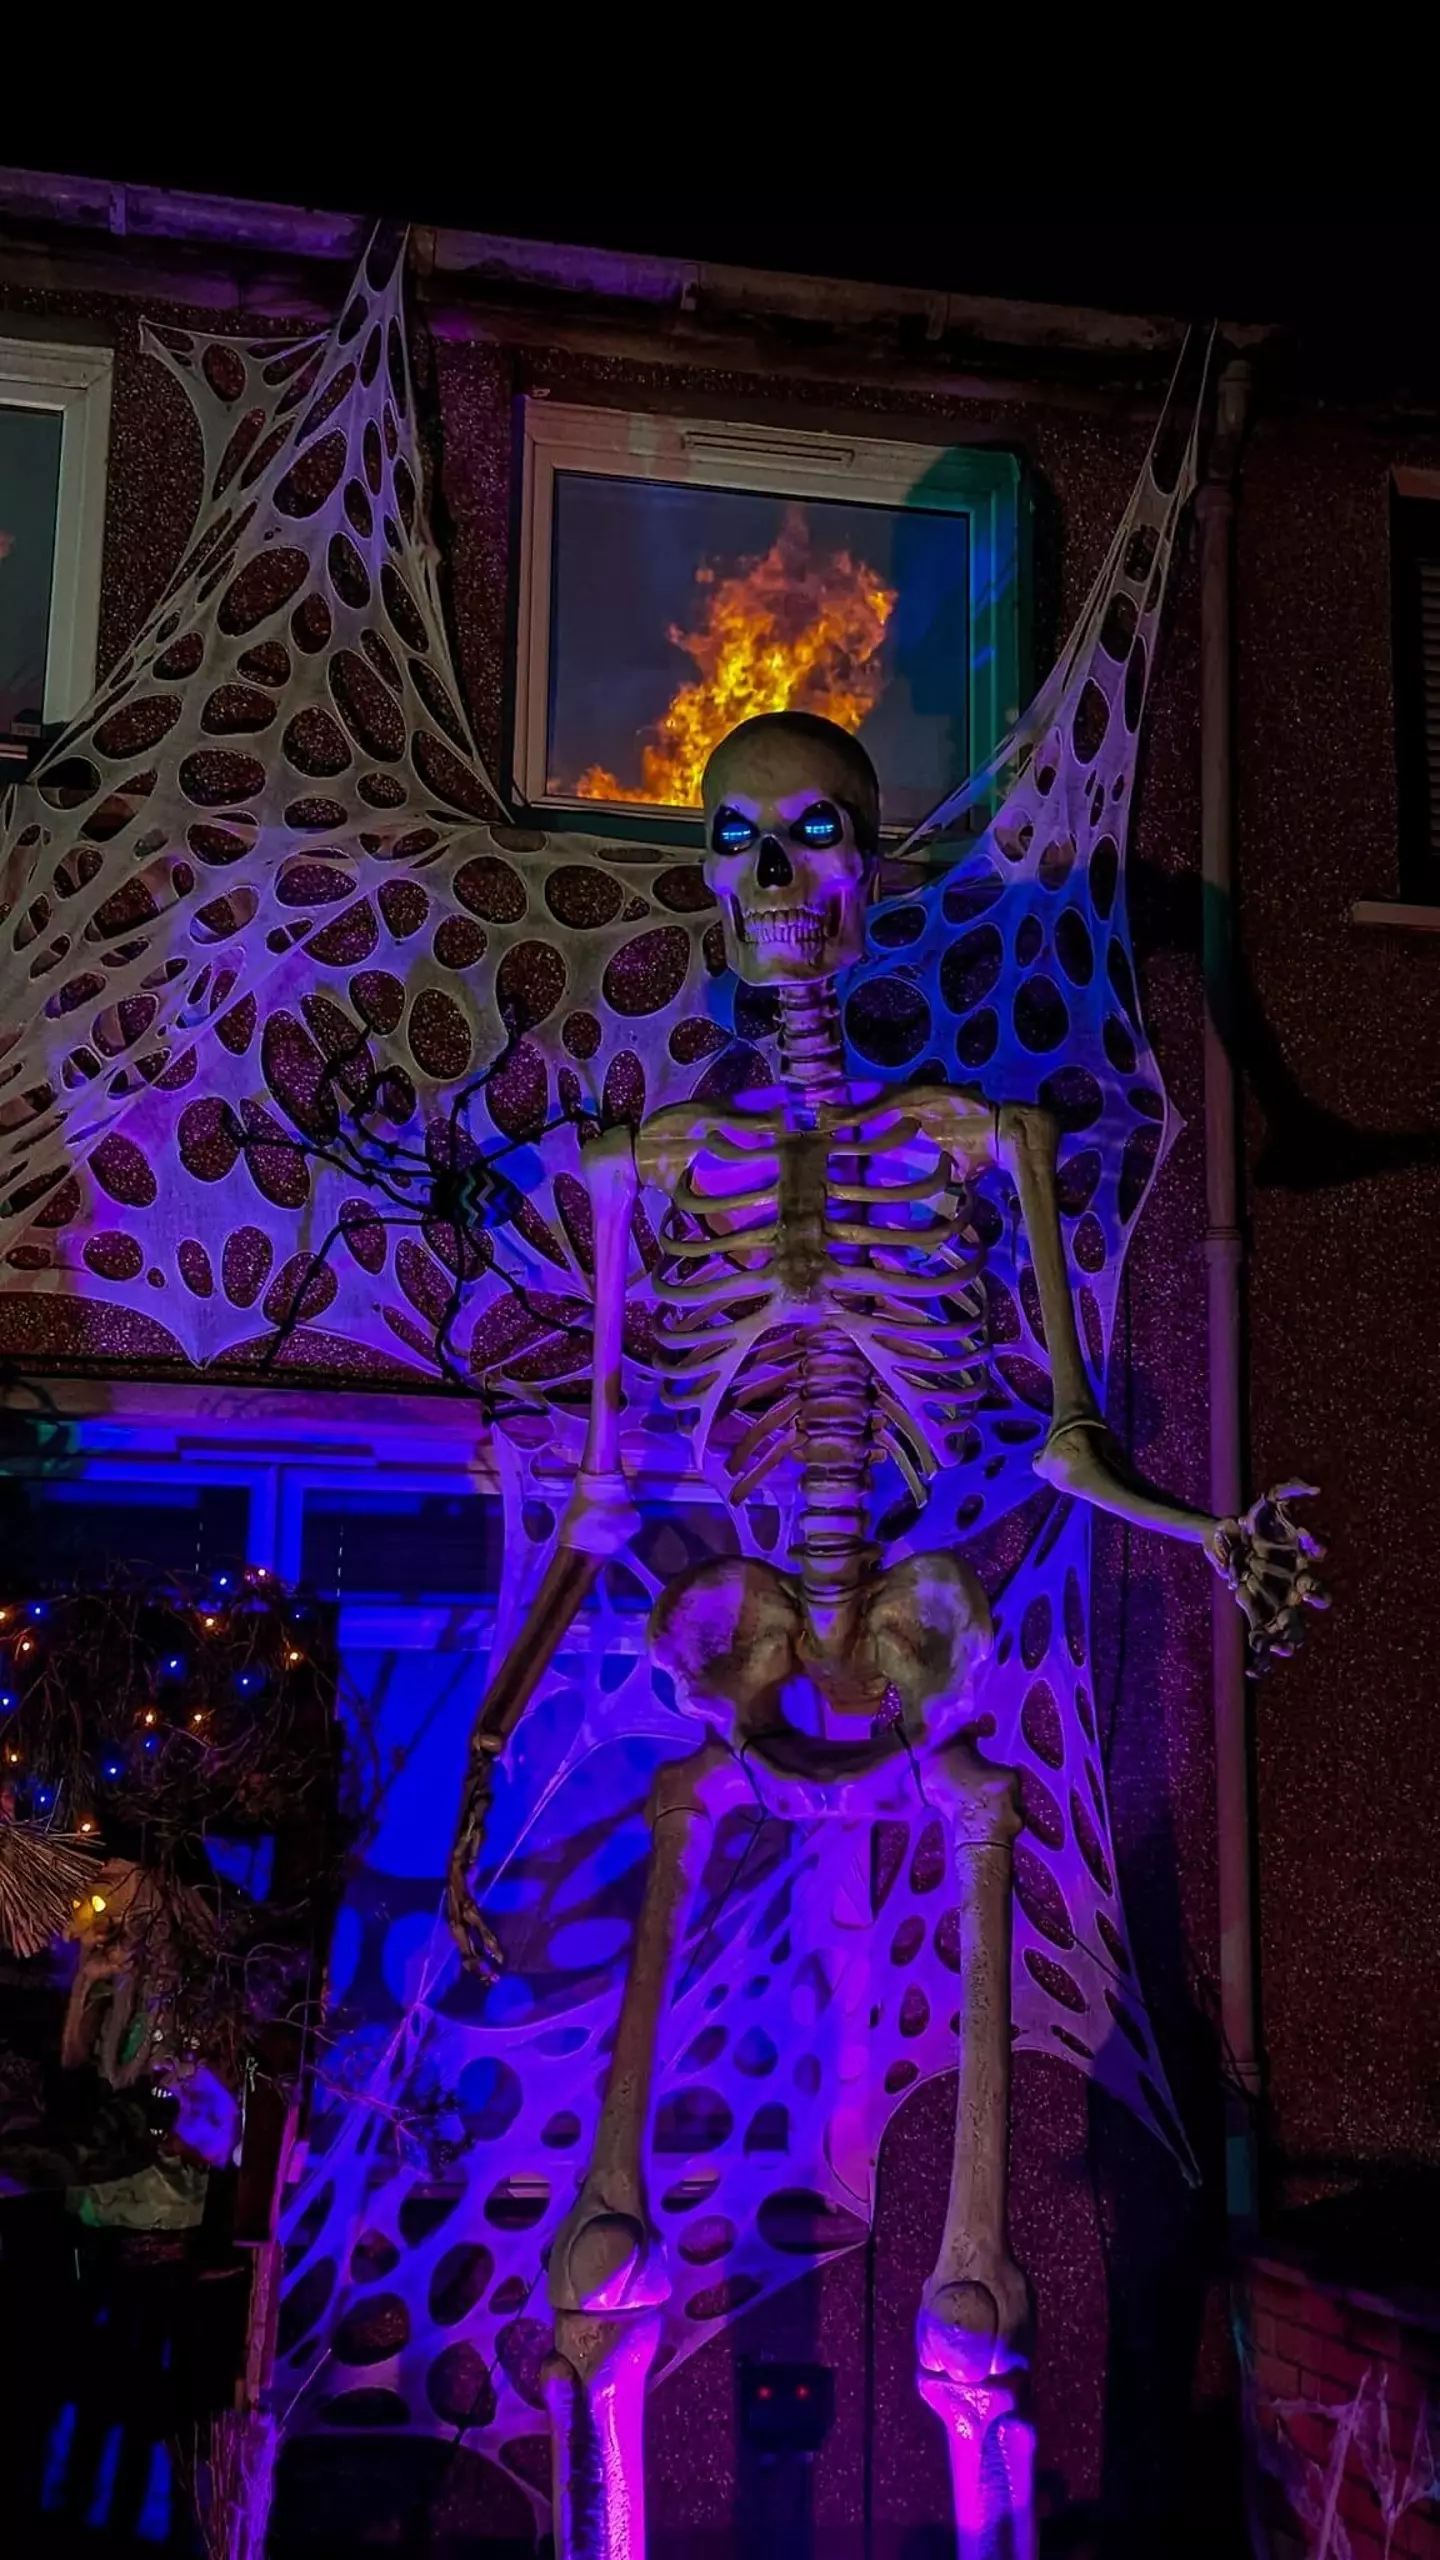 The property is home to a 12ft skeleton.